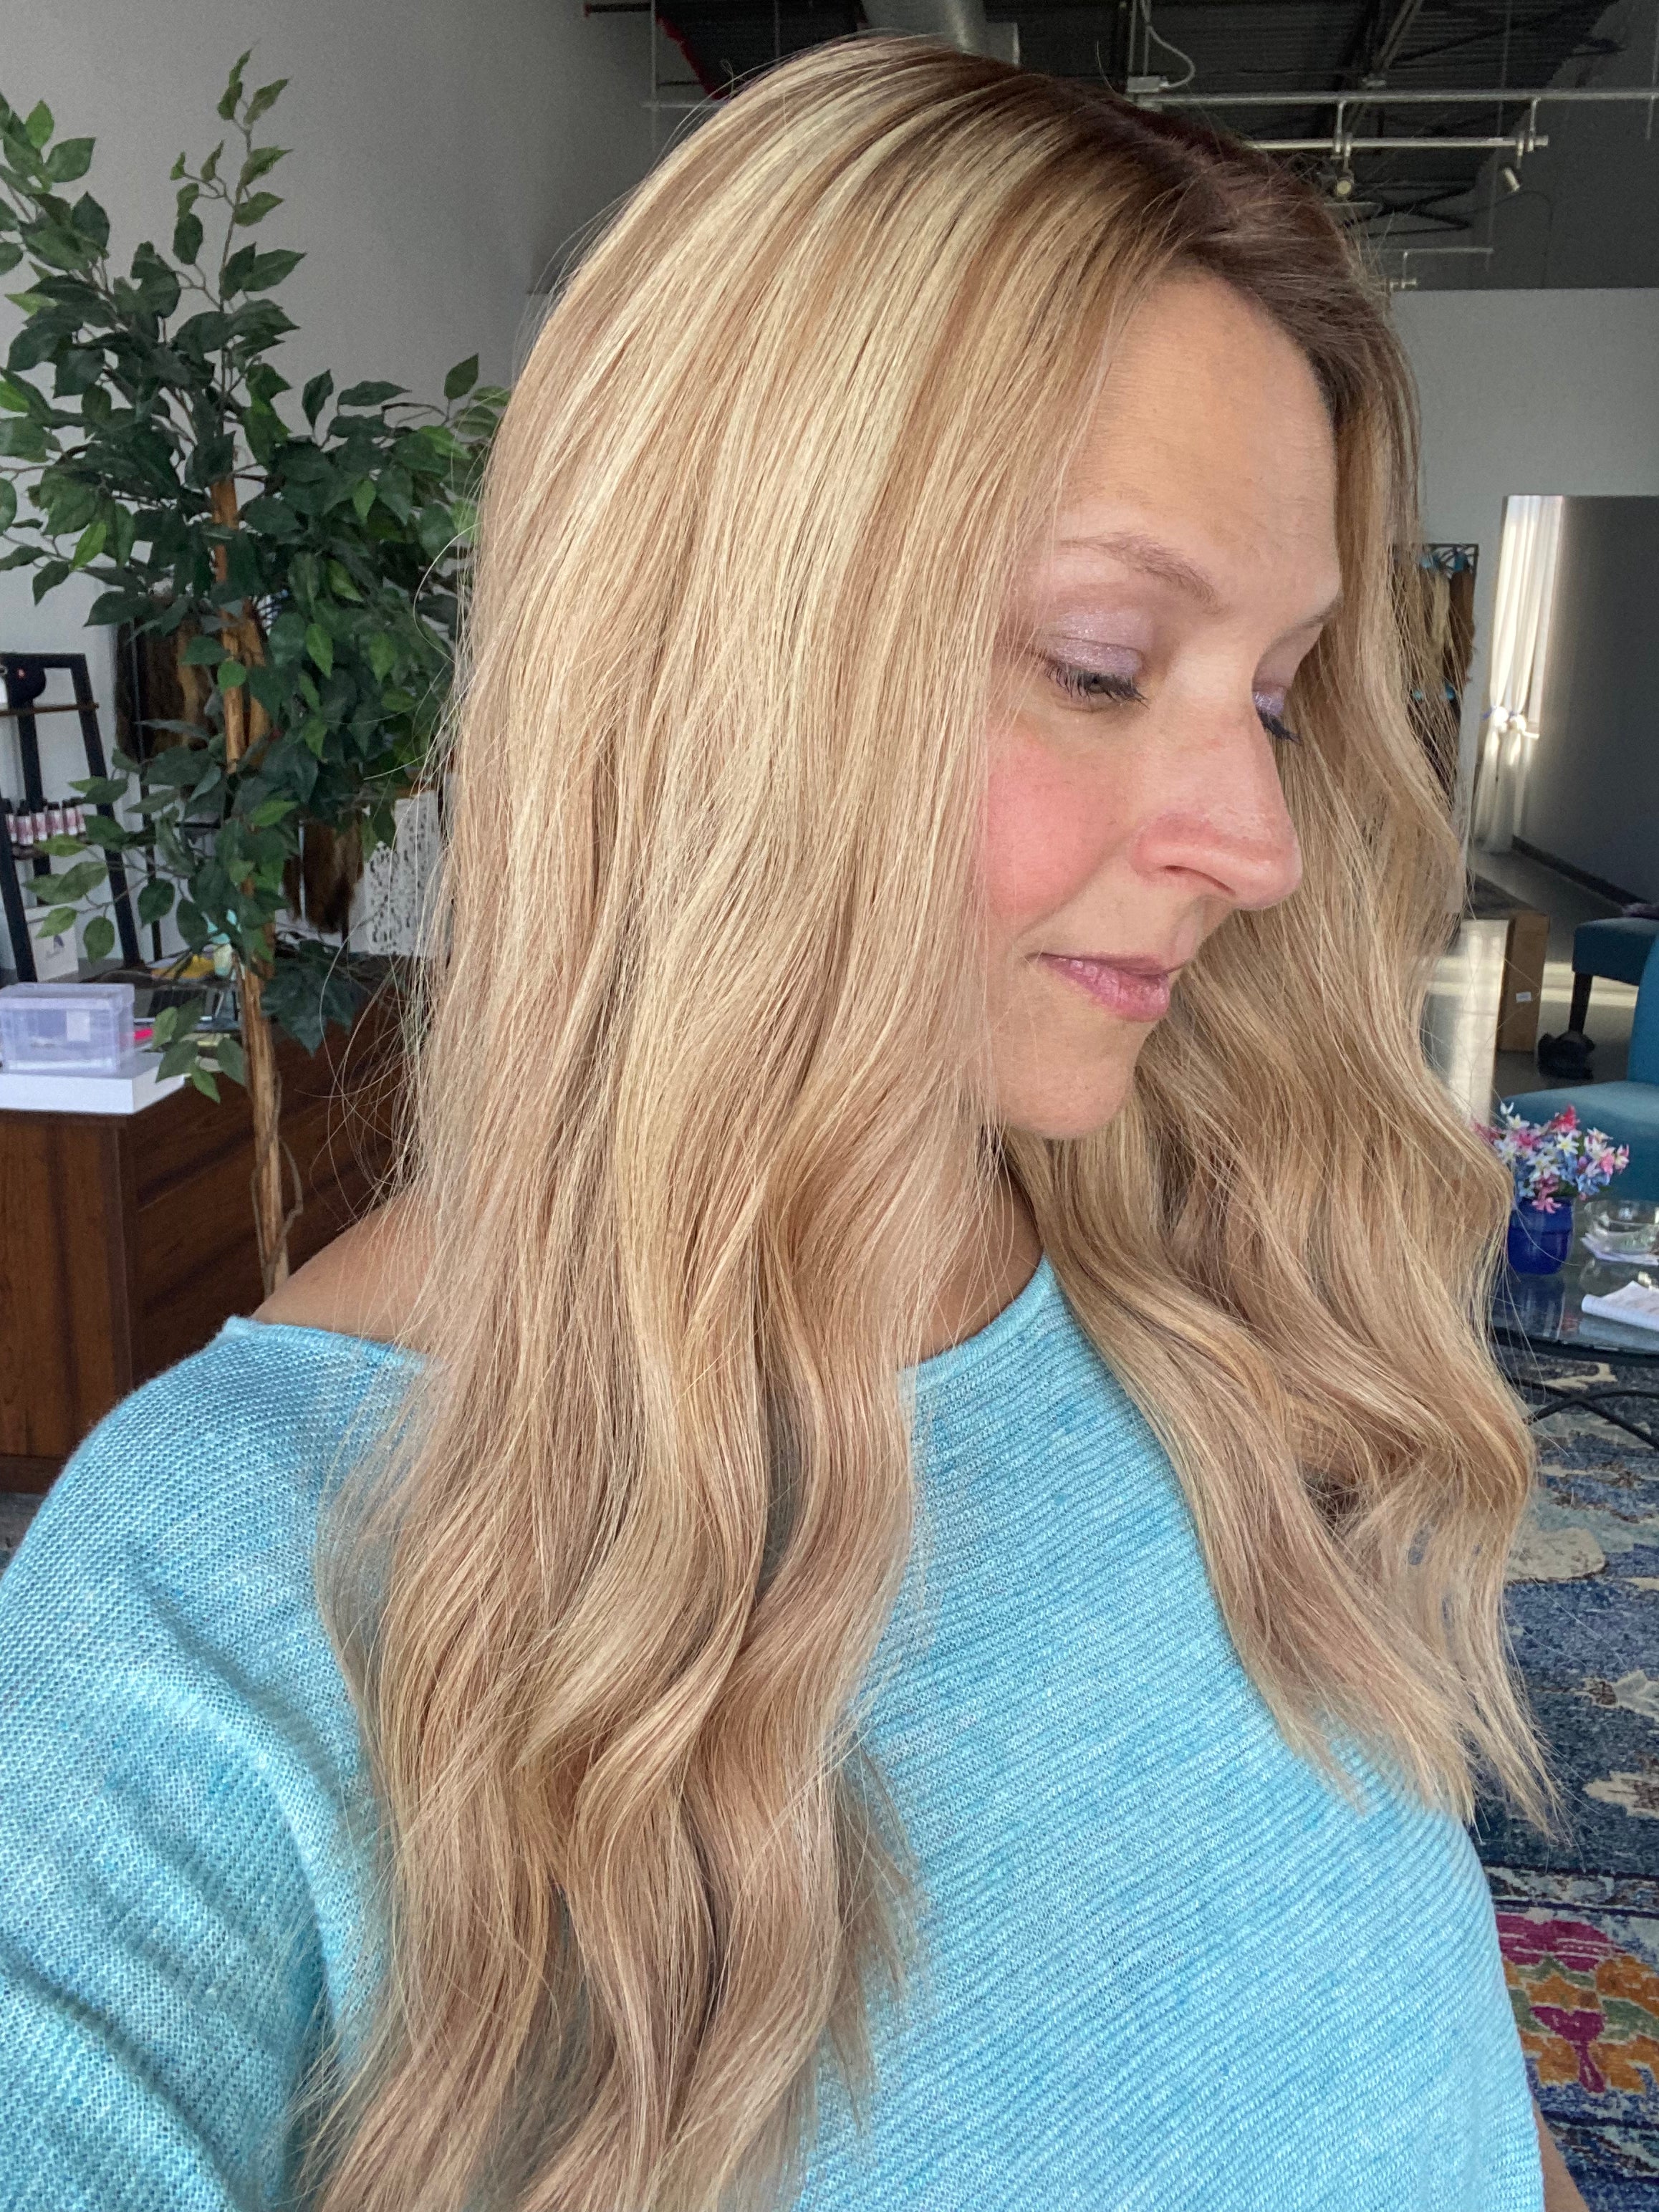 Topper- Specialty Color Rooted Dimensional Sandy Blonde, 9x9, 18-20"